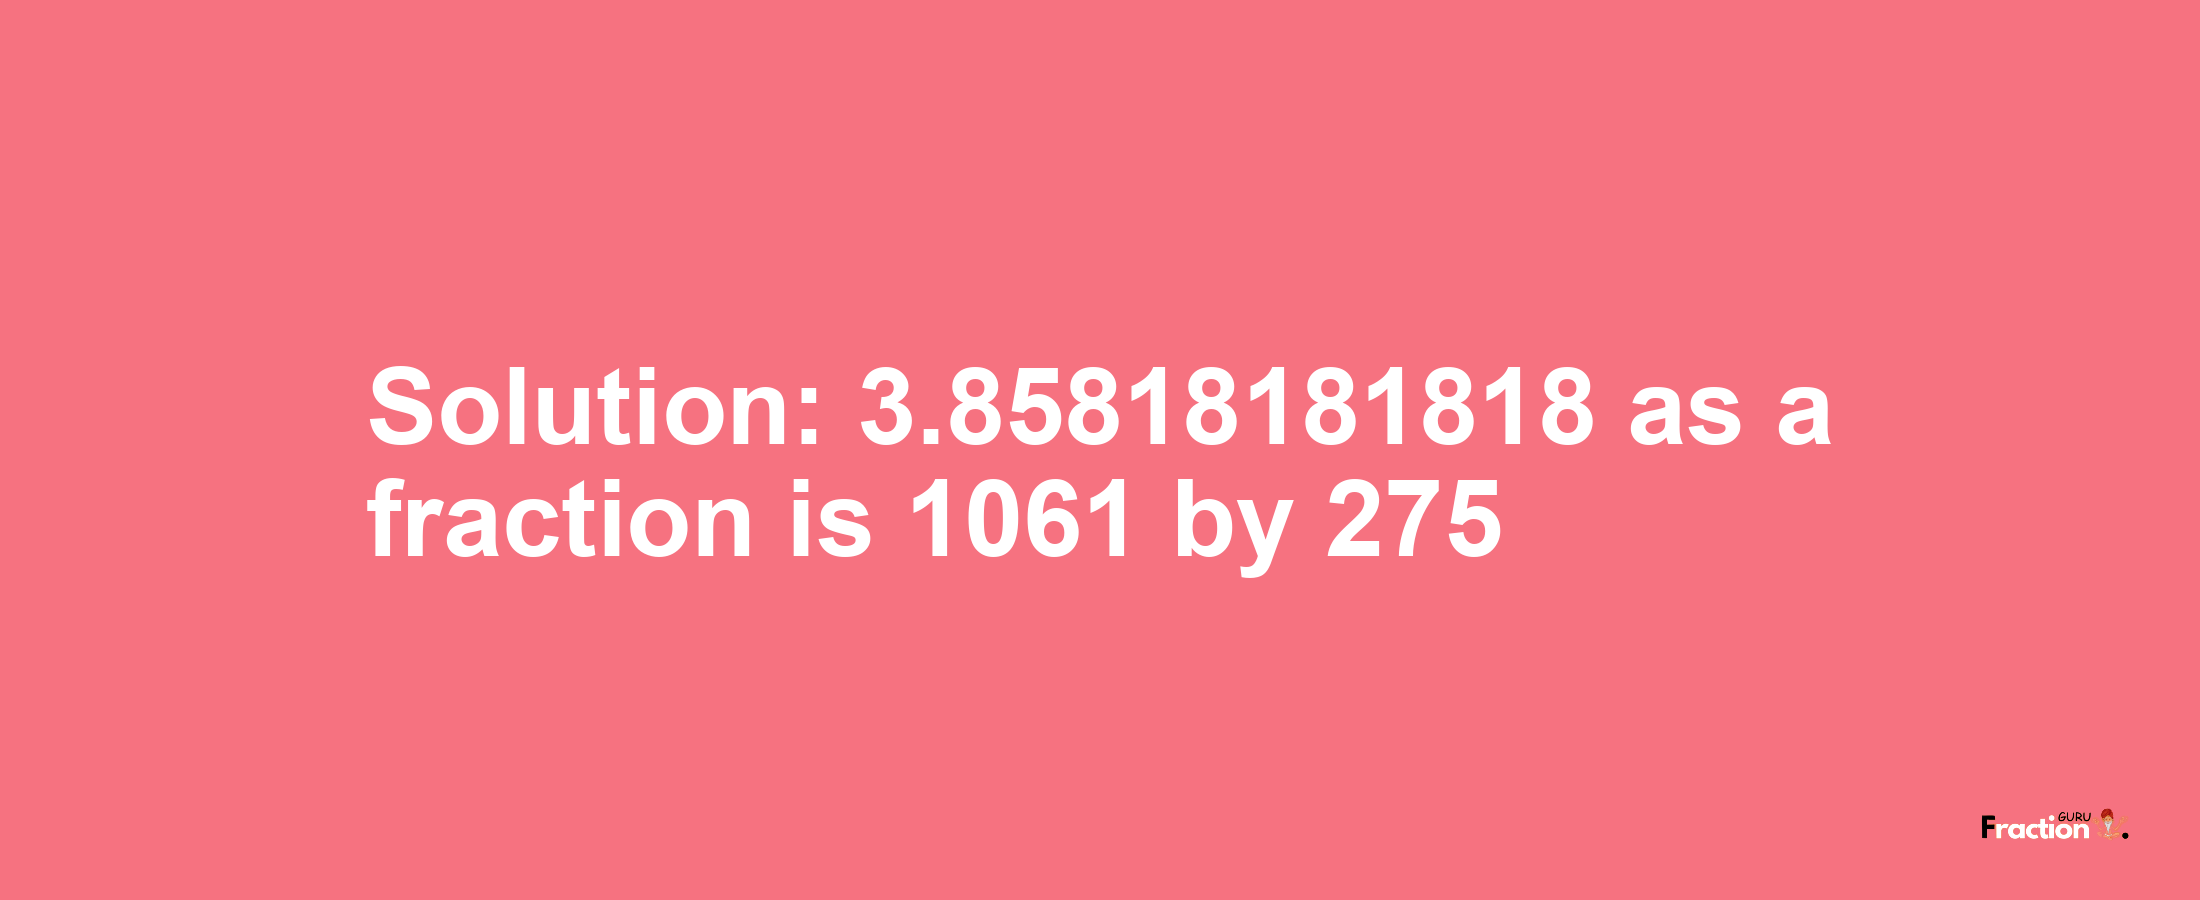 Solution:3.85818181818 as a fraction is 1061/275